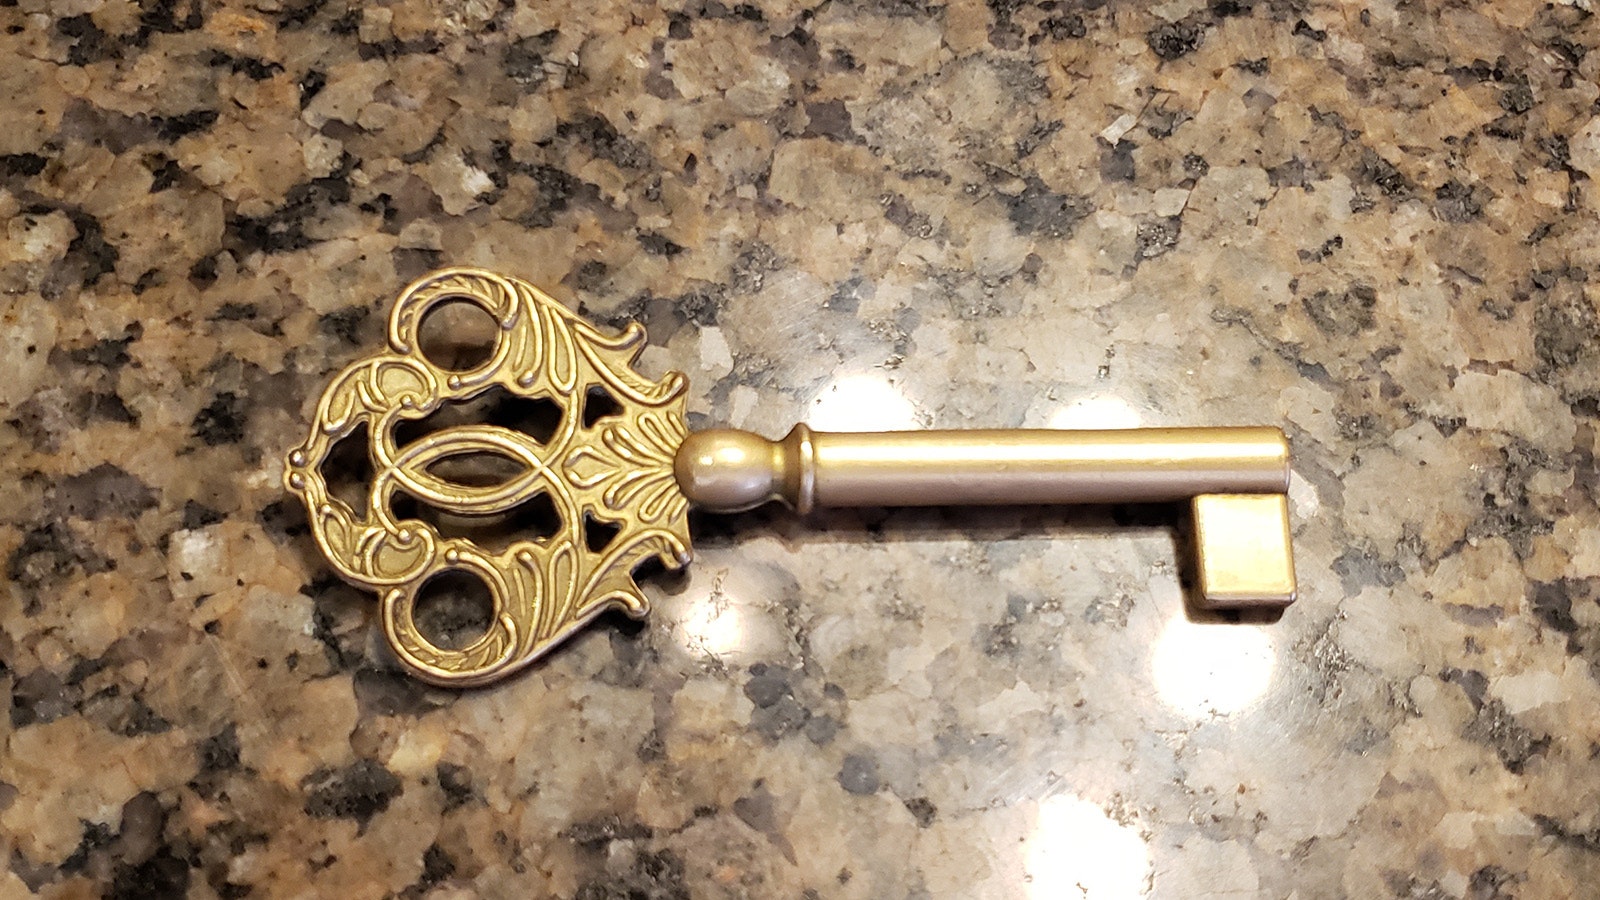 The original key to Room 217, where Steven King is reported to have stayed at The Stanley Hotel and was inspired to write "The Shining."